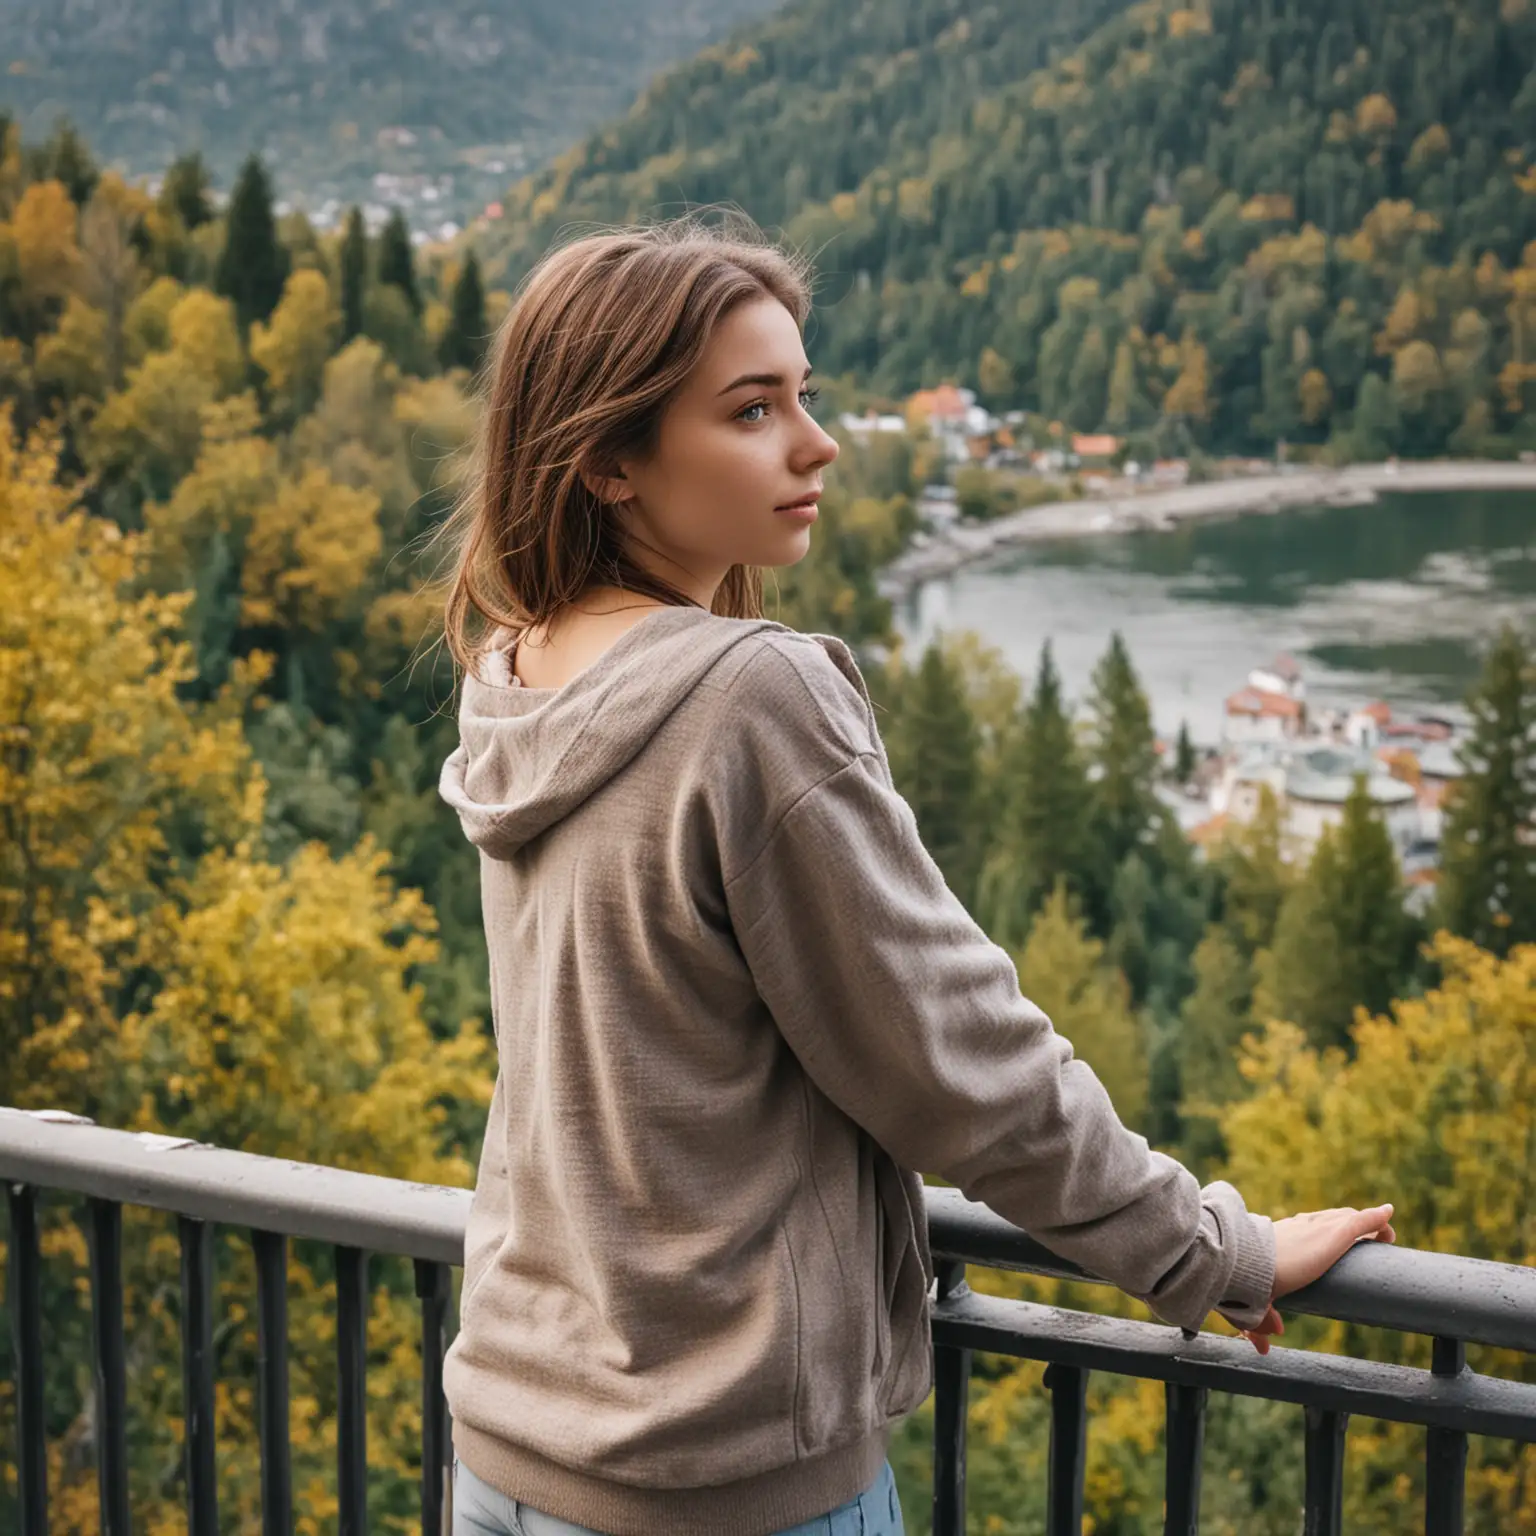 Young-Woman-Admiring-Scenic-View-from-Railing-in-Tourist-Area